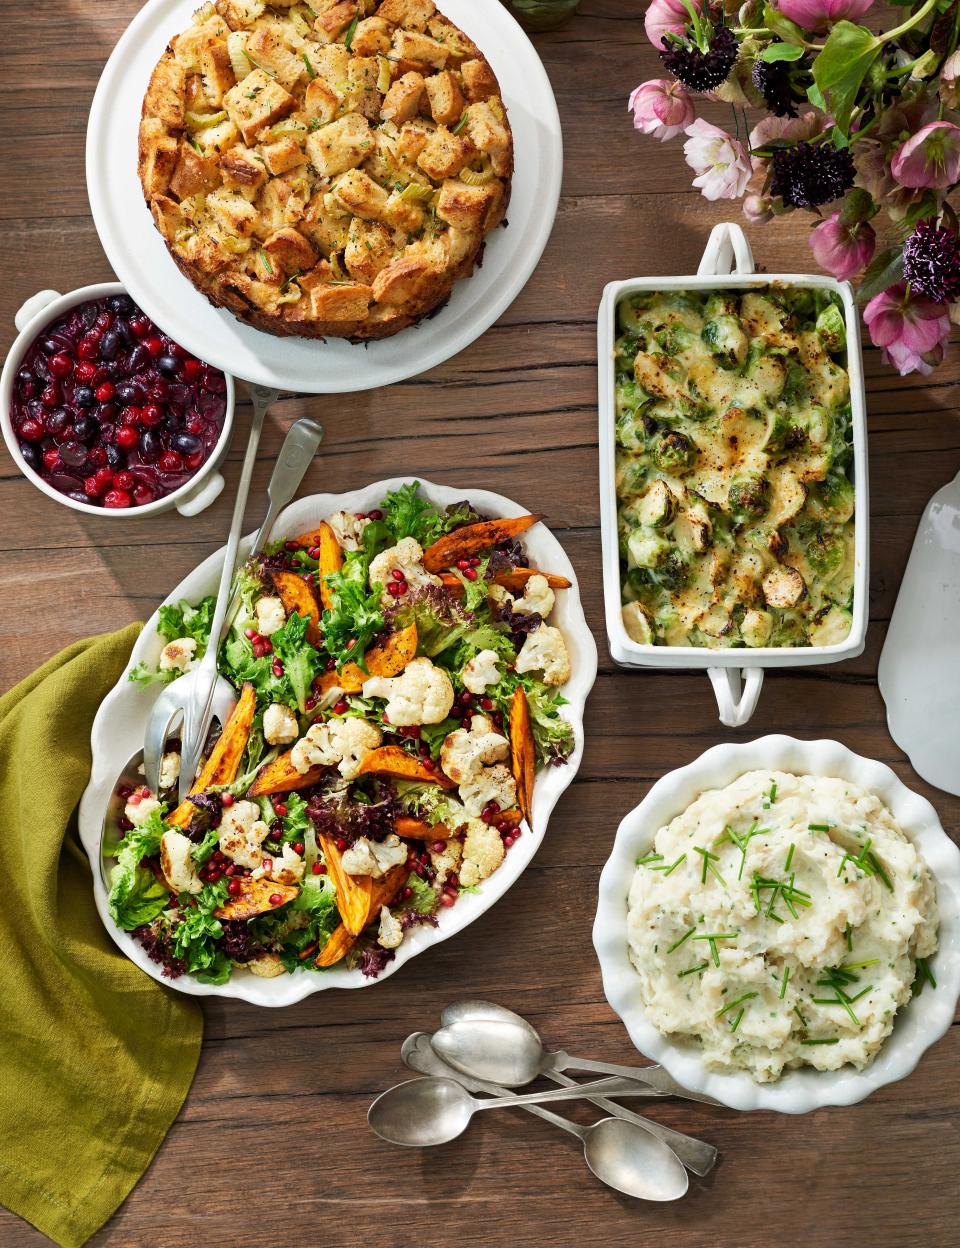 Make Sure Your Thanksgiving Table Is Packed with These Fall Vegetable Dishes